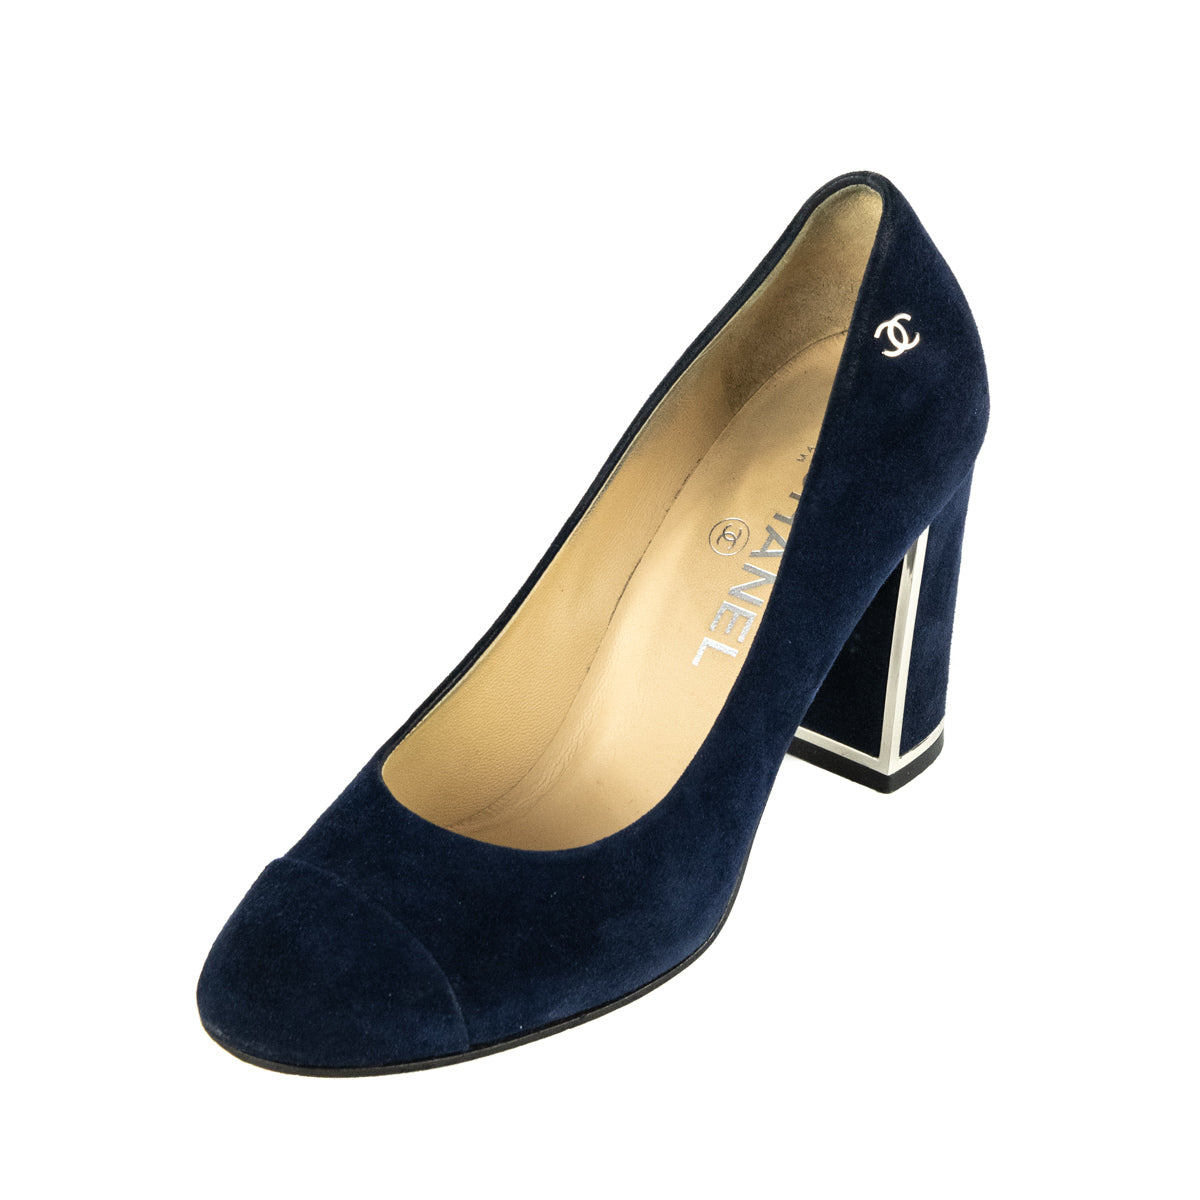 Chanel Blue Suede Block Heel Pumps - Secondhand Chanel Pumps Canada – Love  that Bag etc - Preowned Designer Fashions